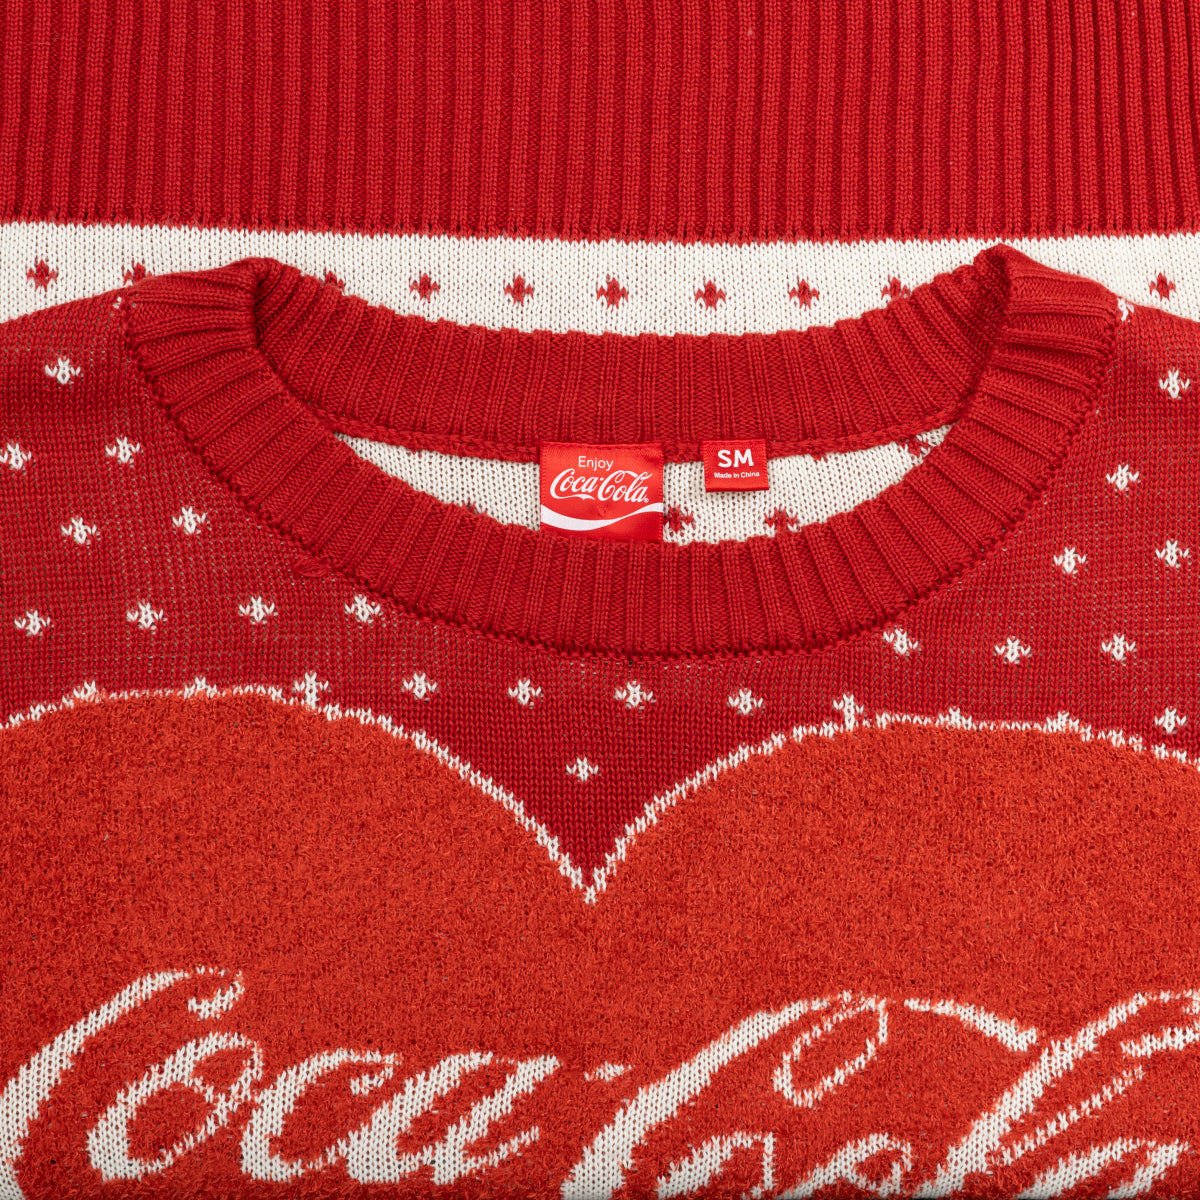 Coca-Cola Heart Bear Spread Joy with Festive Ugly Sweater Christmas Sweaters Collar